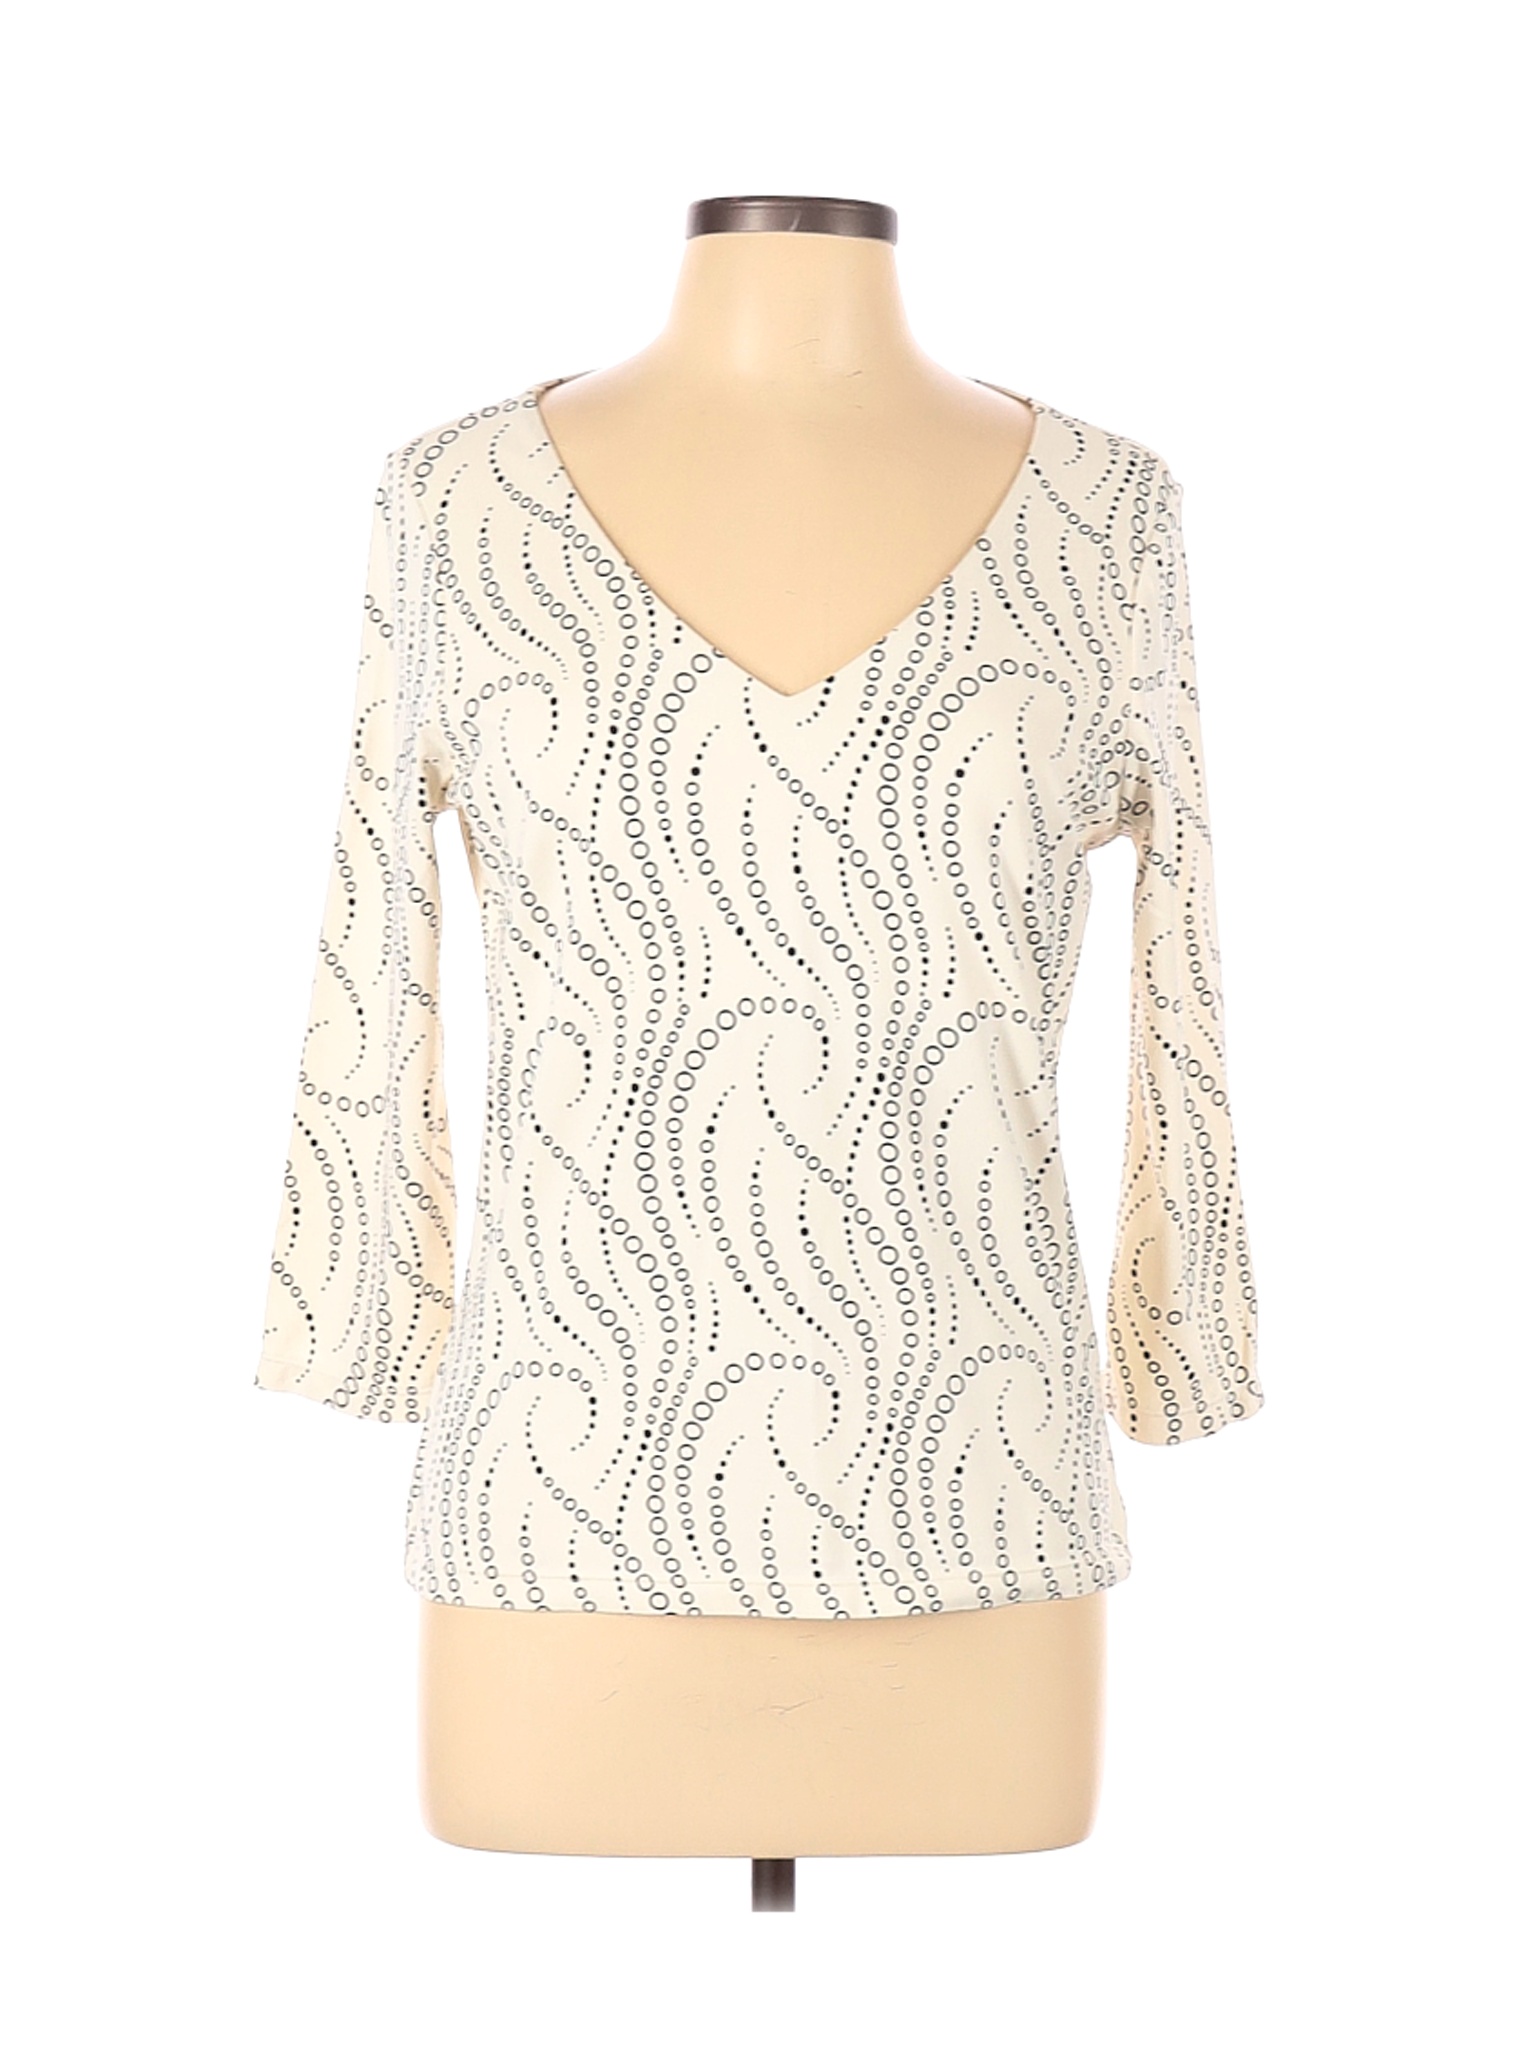 The Limited Women Ivory Long Sleeve Top L | eBay